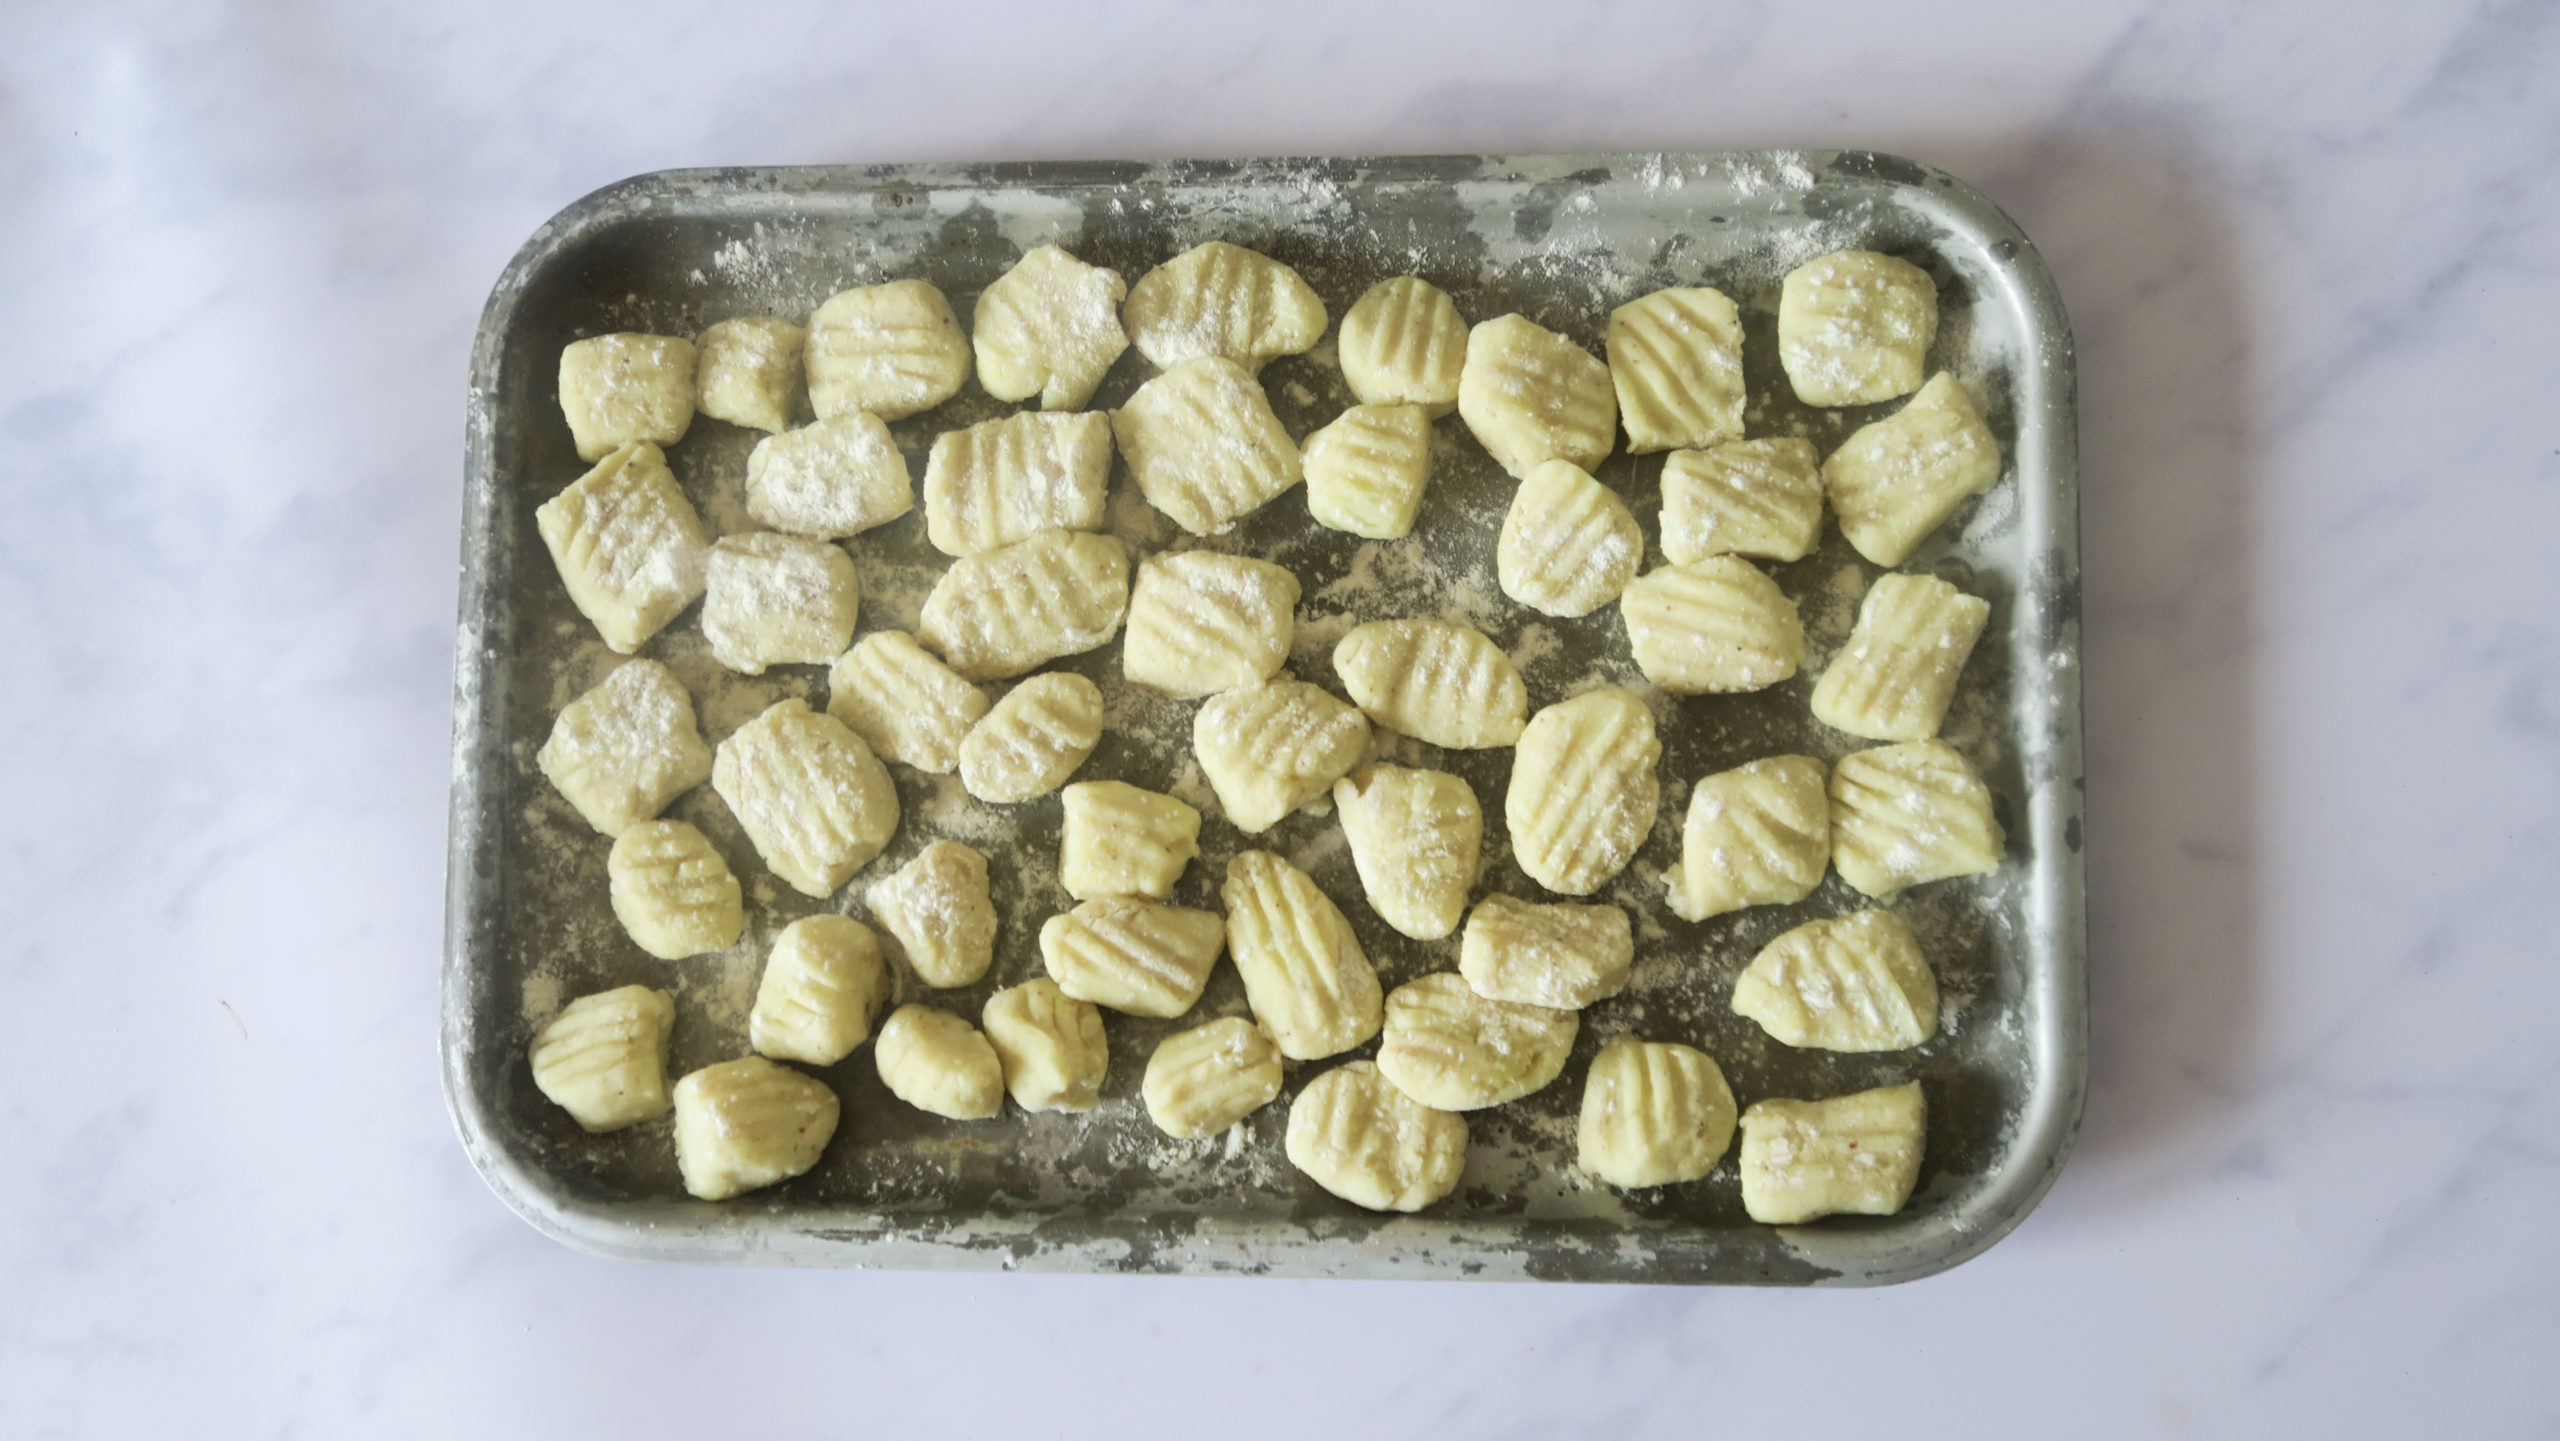 How to make gnocchi without egg